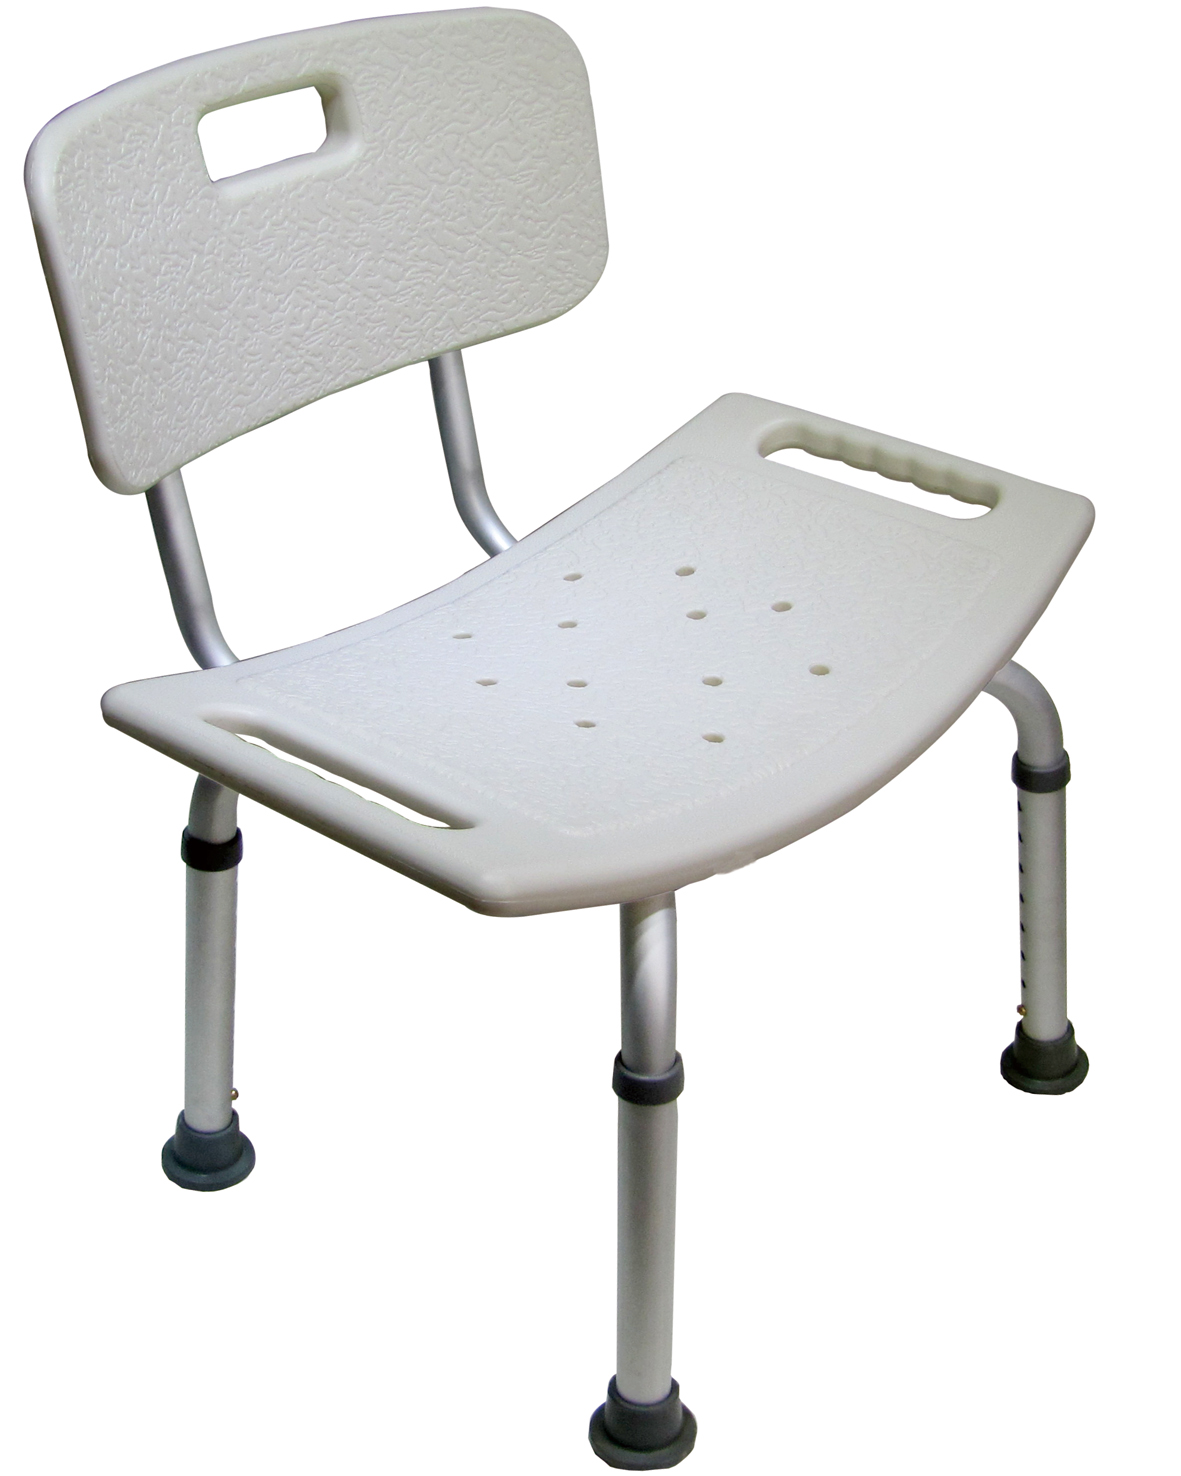 Easi-Bathe Shower Chair With Back